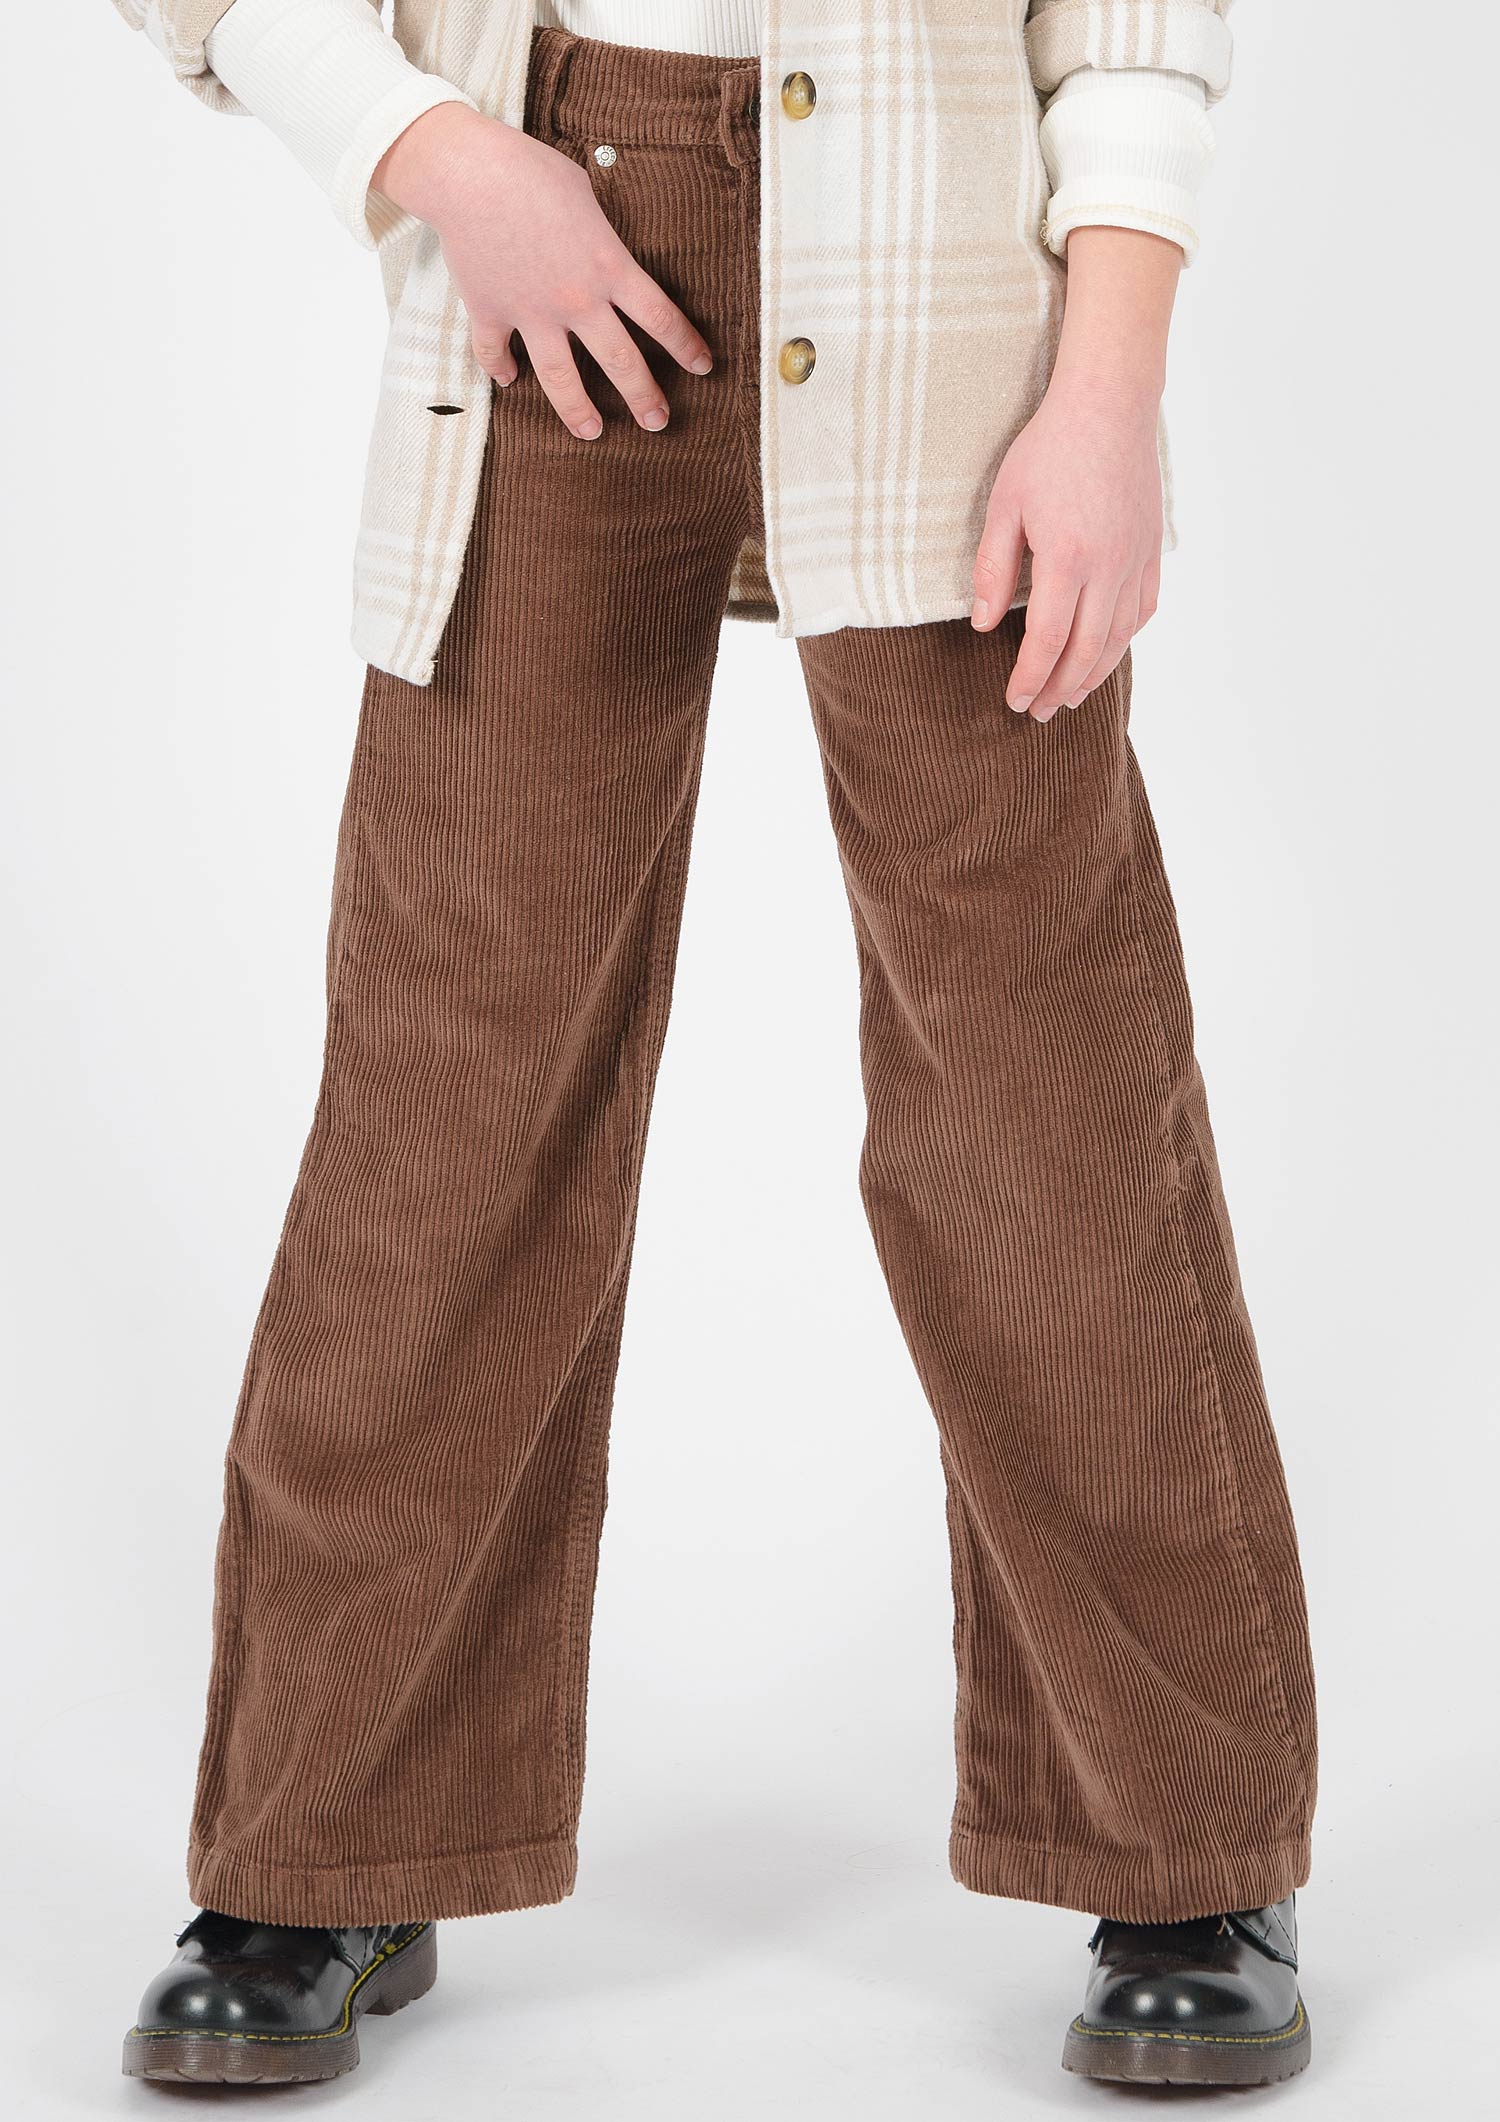 1335-Girls Wide Leg Pant Corduroy, available in Normal